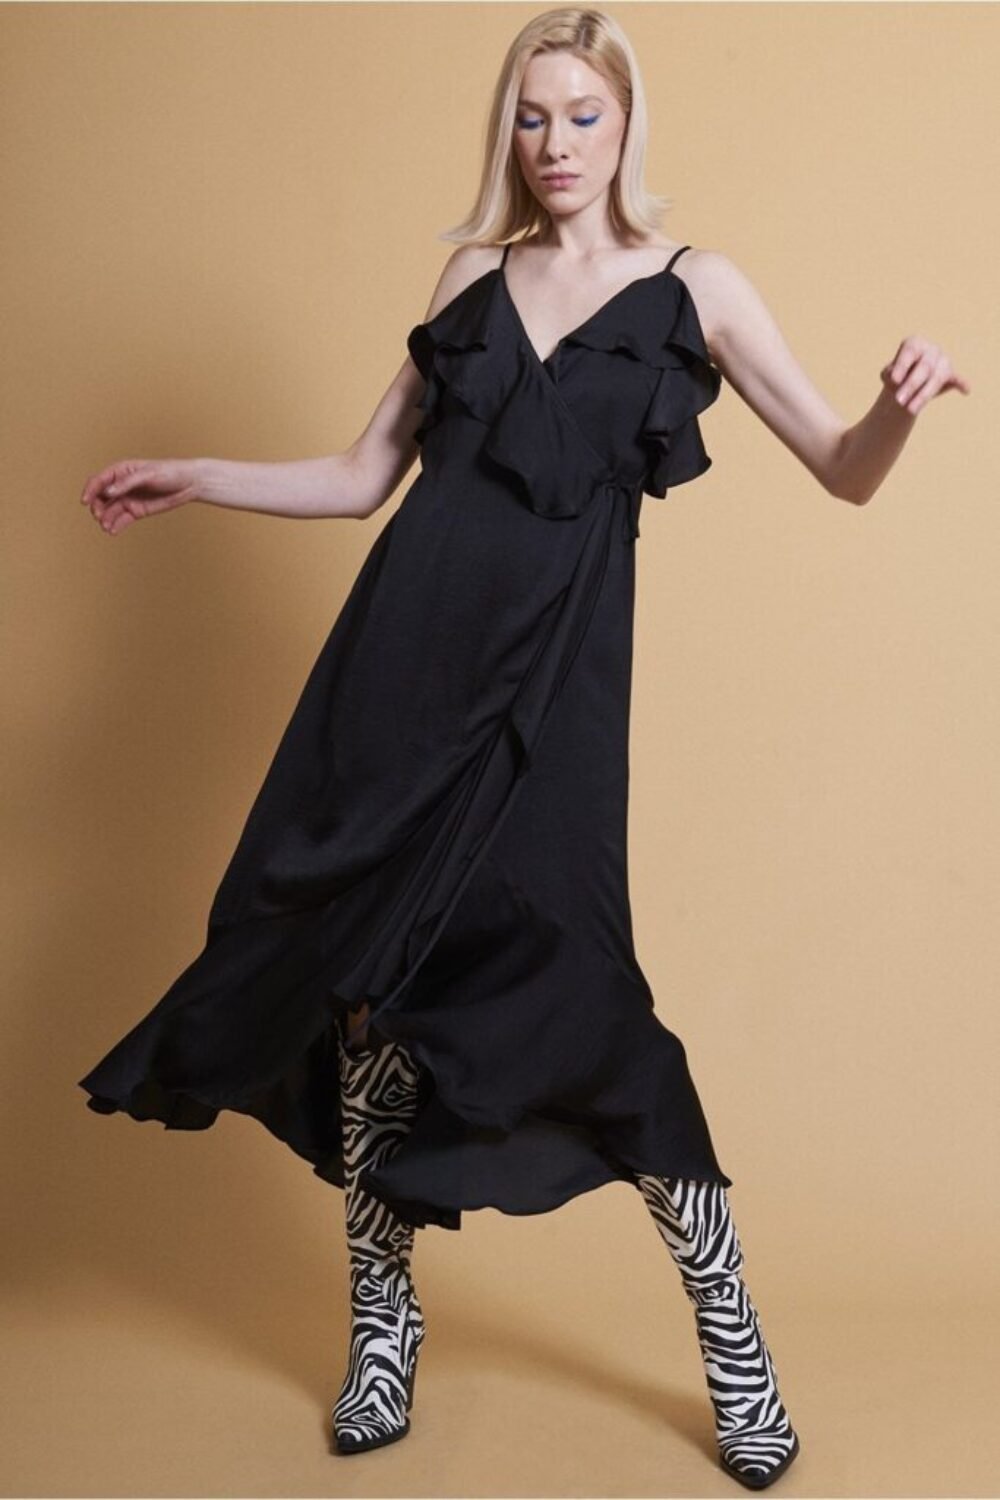 Shop Lux Black Silk Blend Maxi Ruffle Dress and women's luxury and designer clothes at www.lux-apparel.co.uk